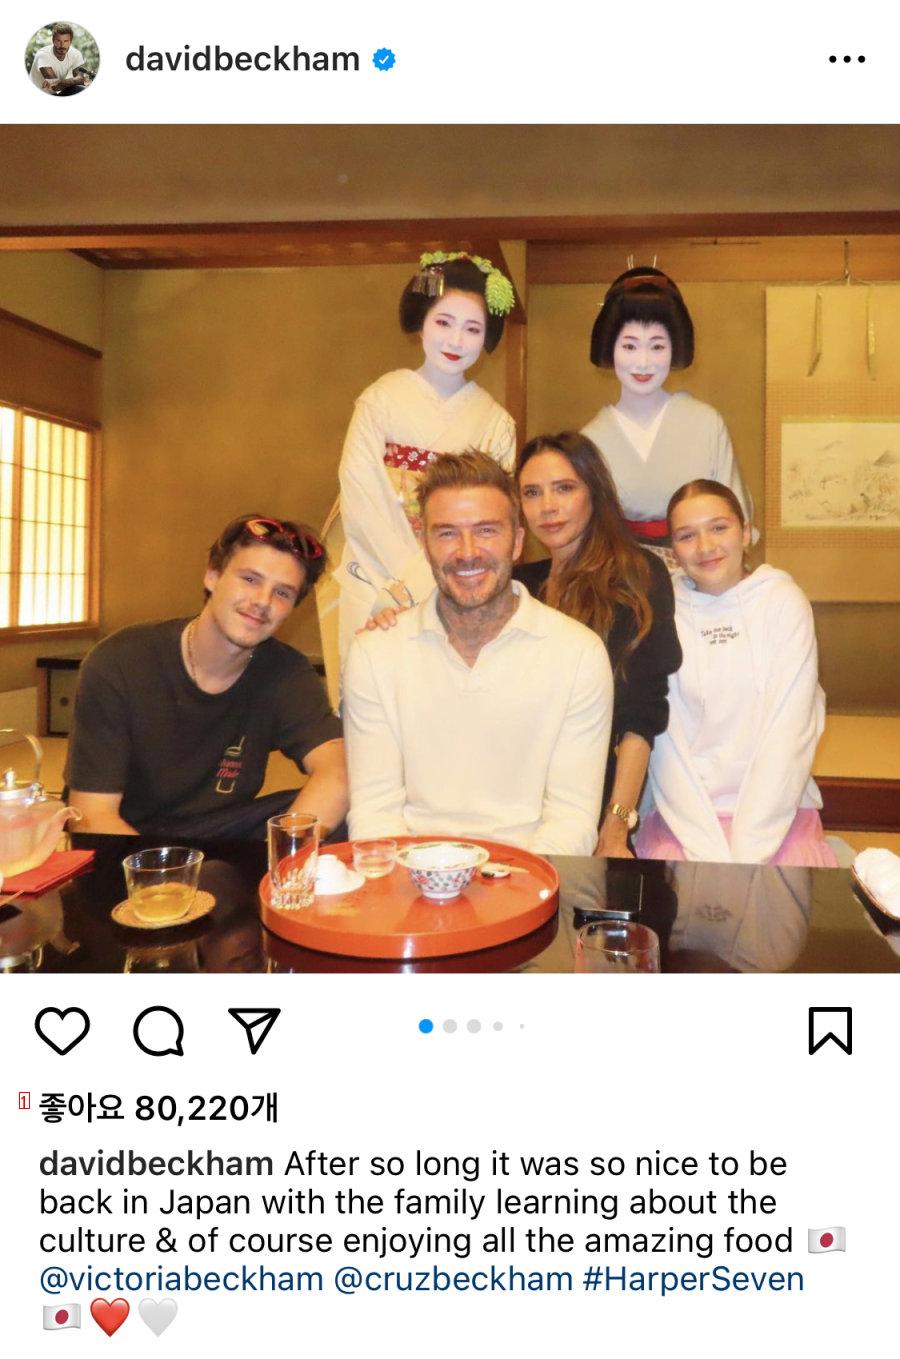 Beckham's family went on a trip to Japan